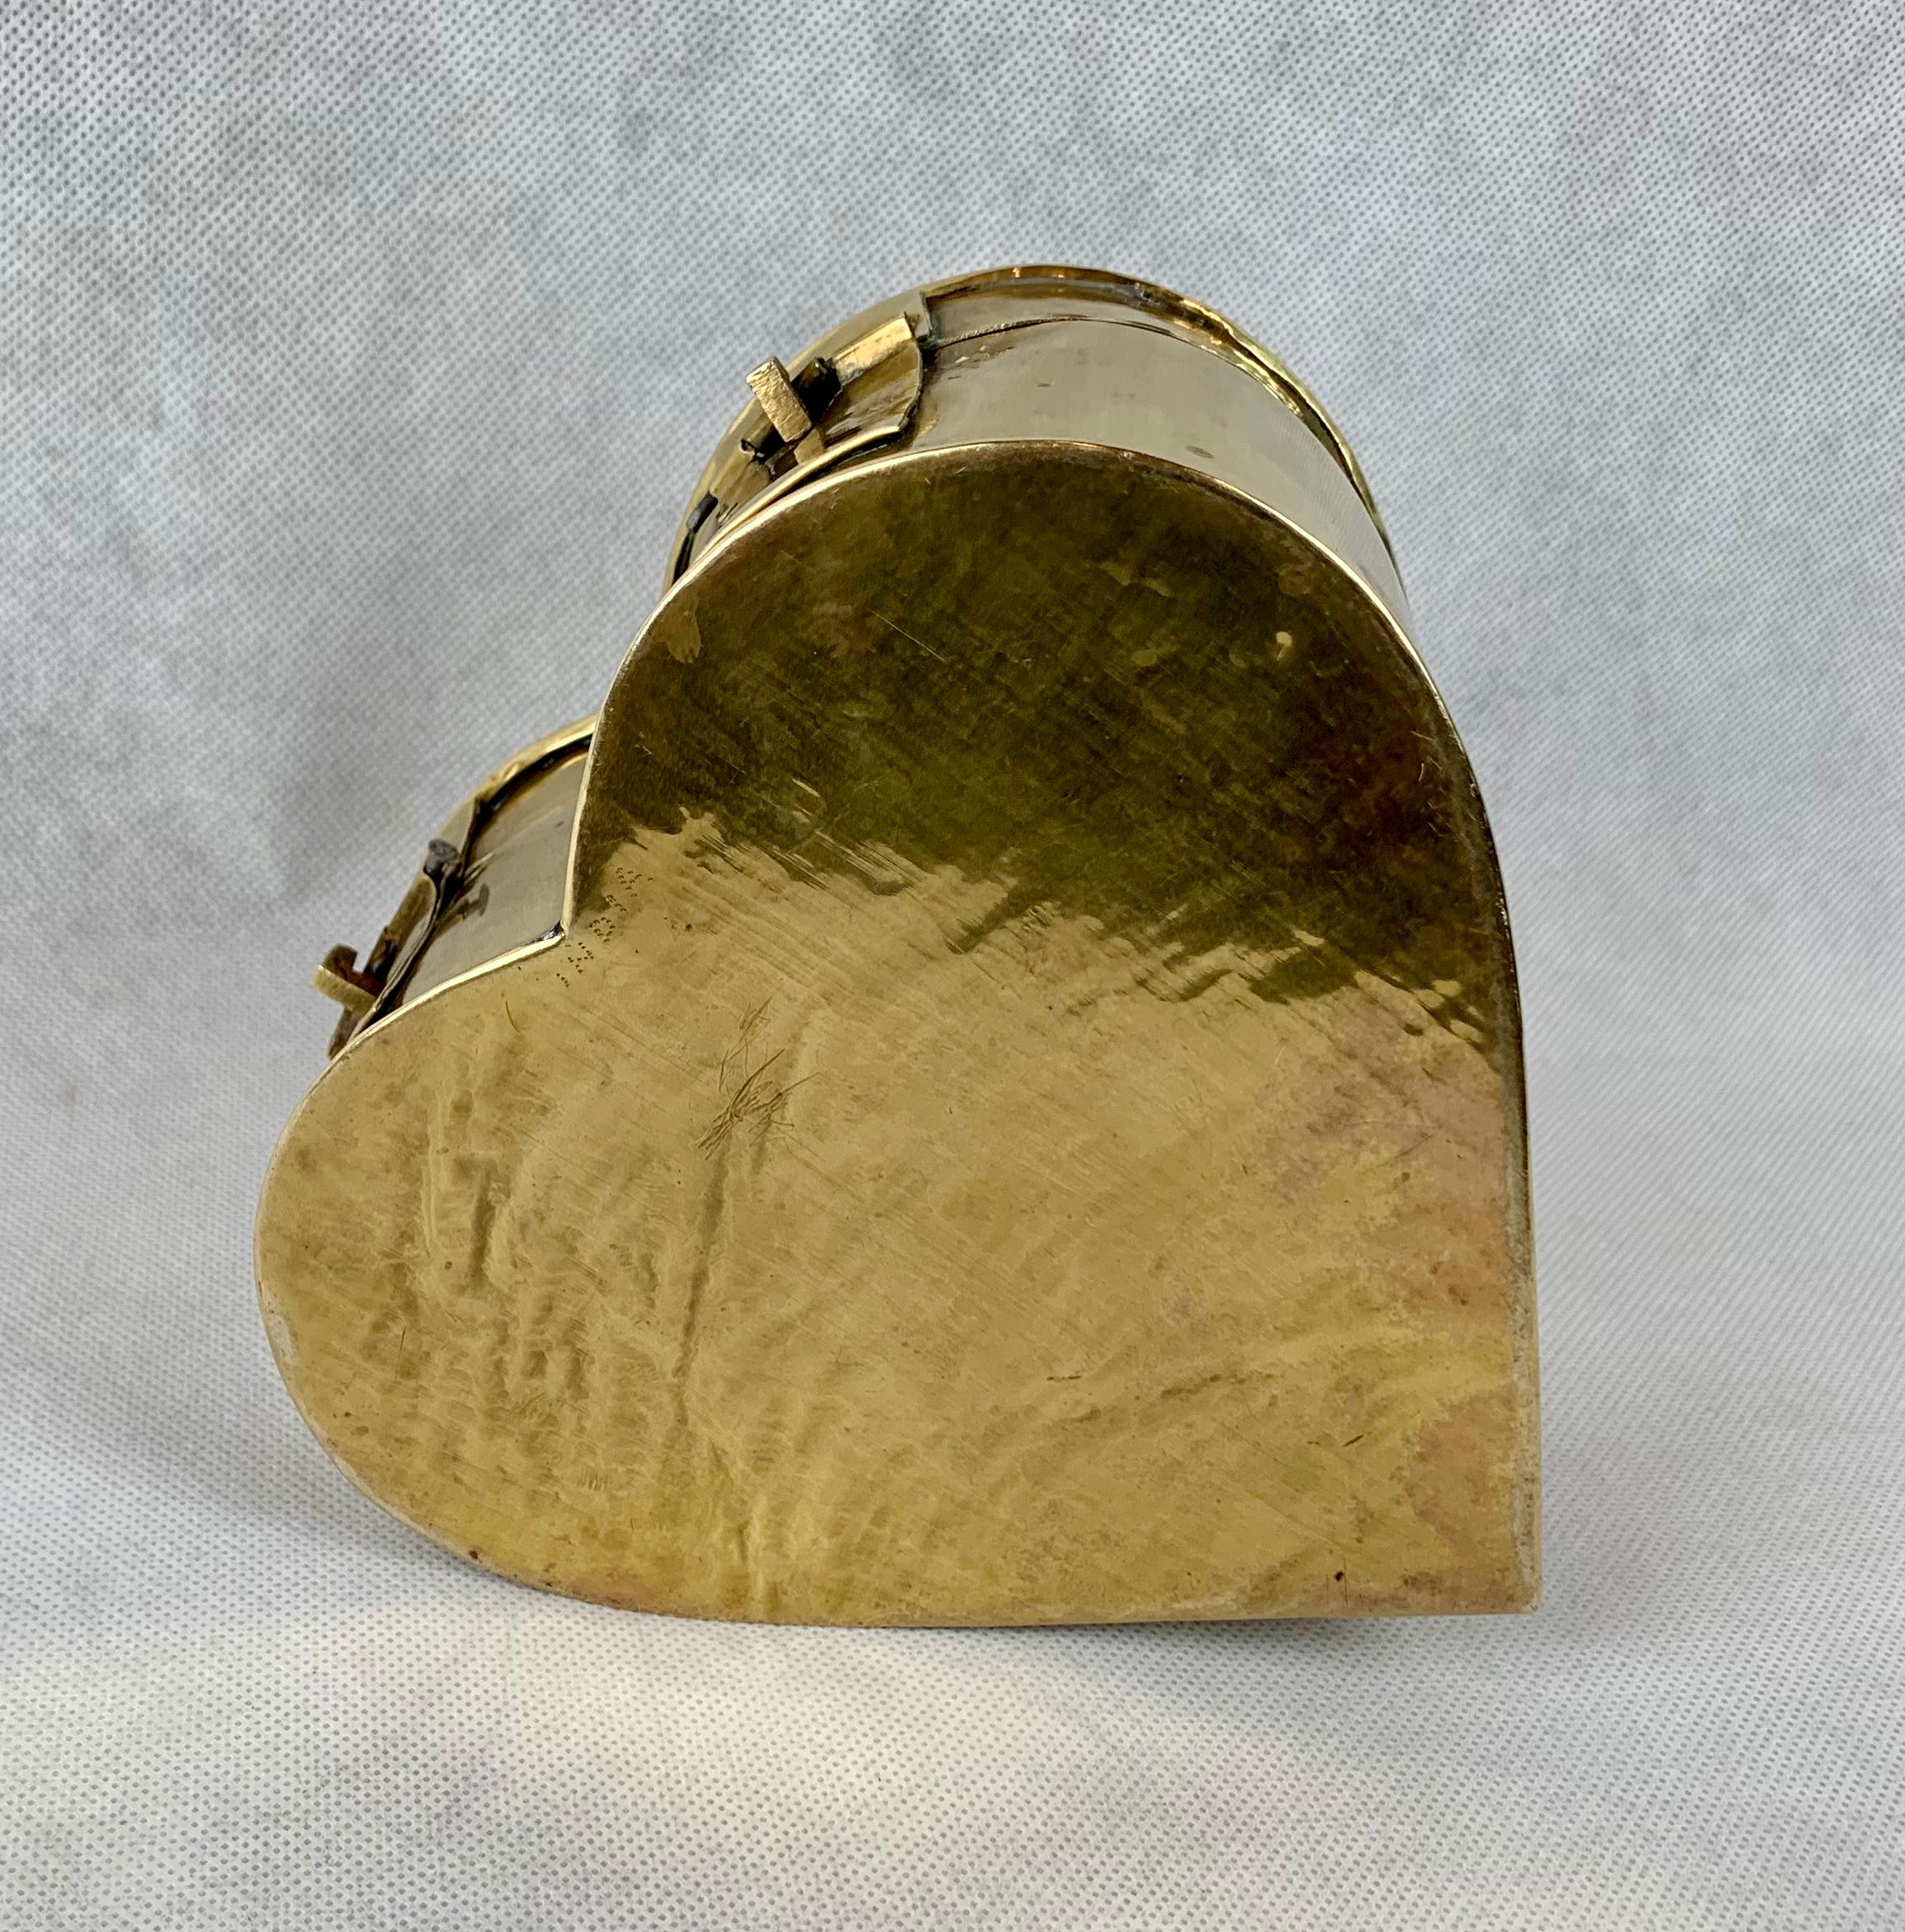 Hand-Crafted Brass Heart Shaped Vintage Hinged Box with Fold Down Handle